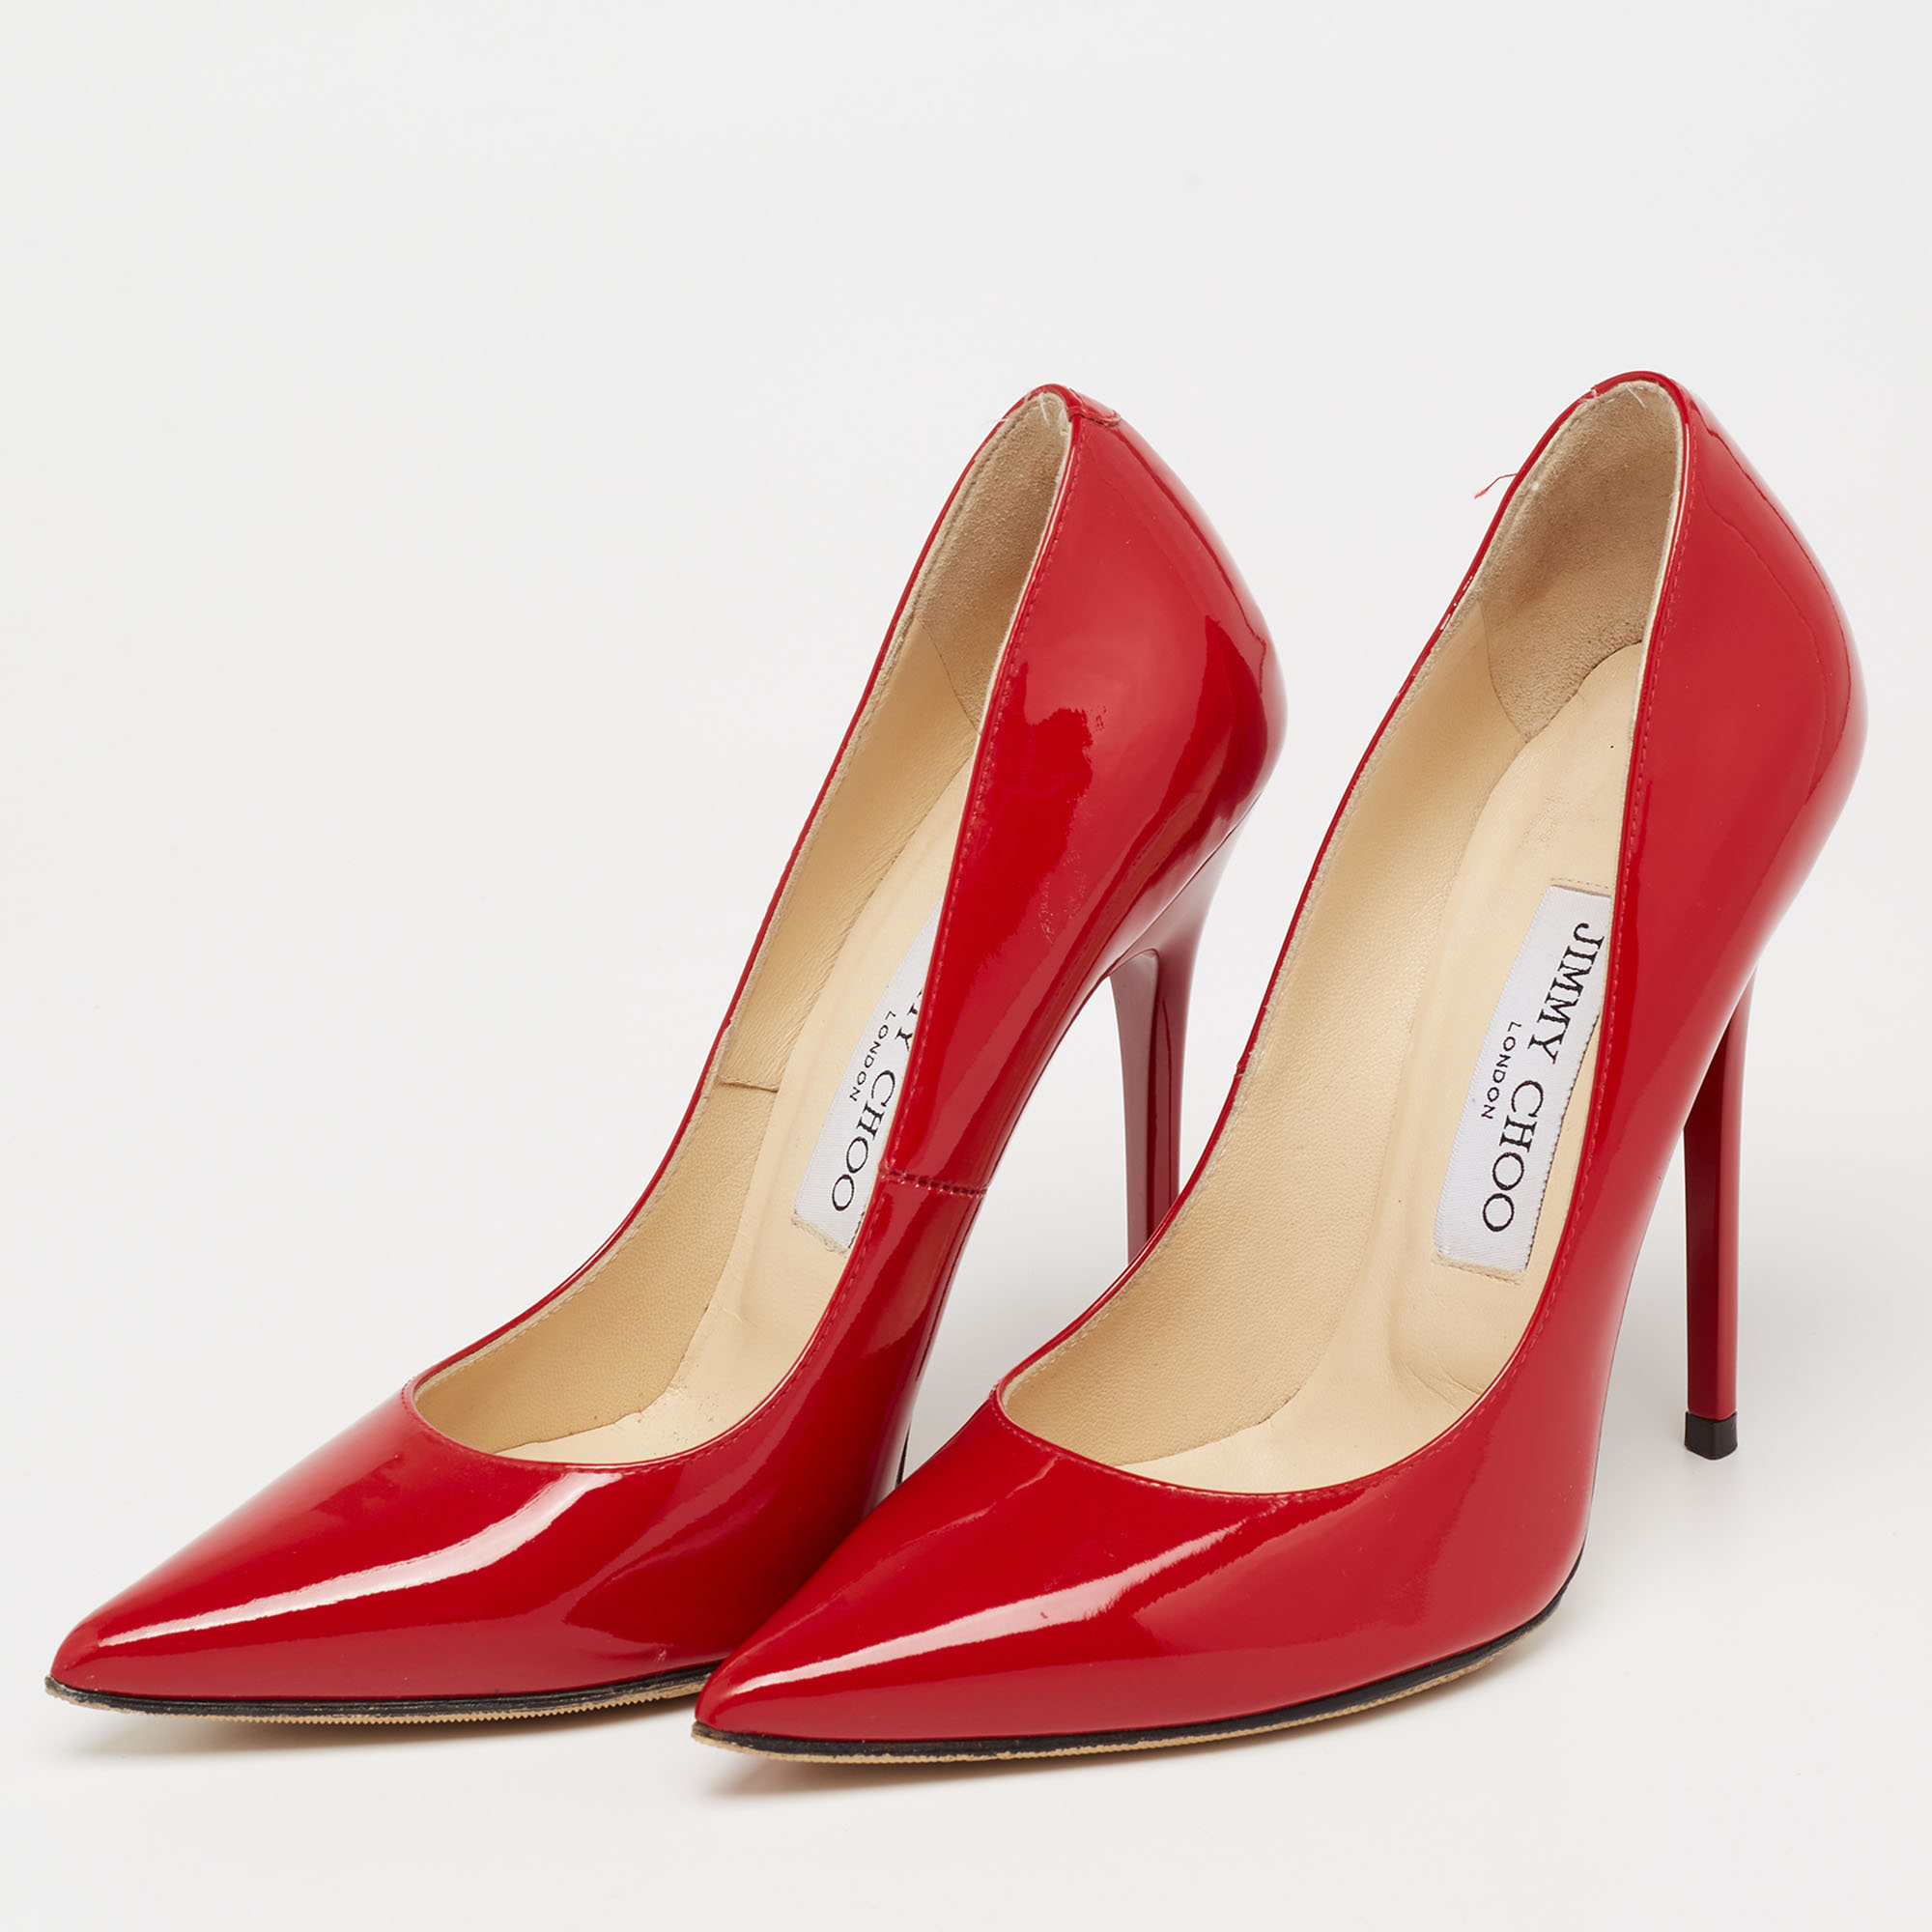 

Jimmy Choo Red Patent Leather Anouk Pumps Size